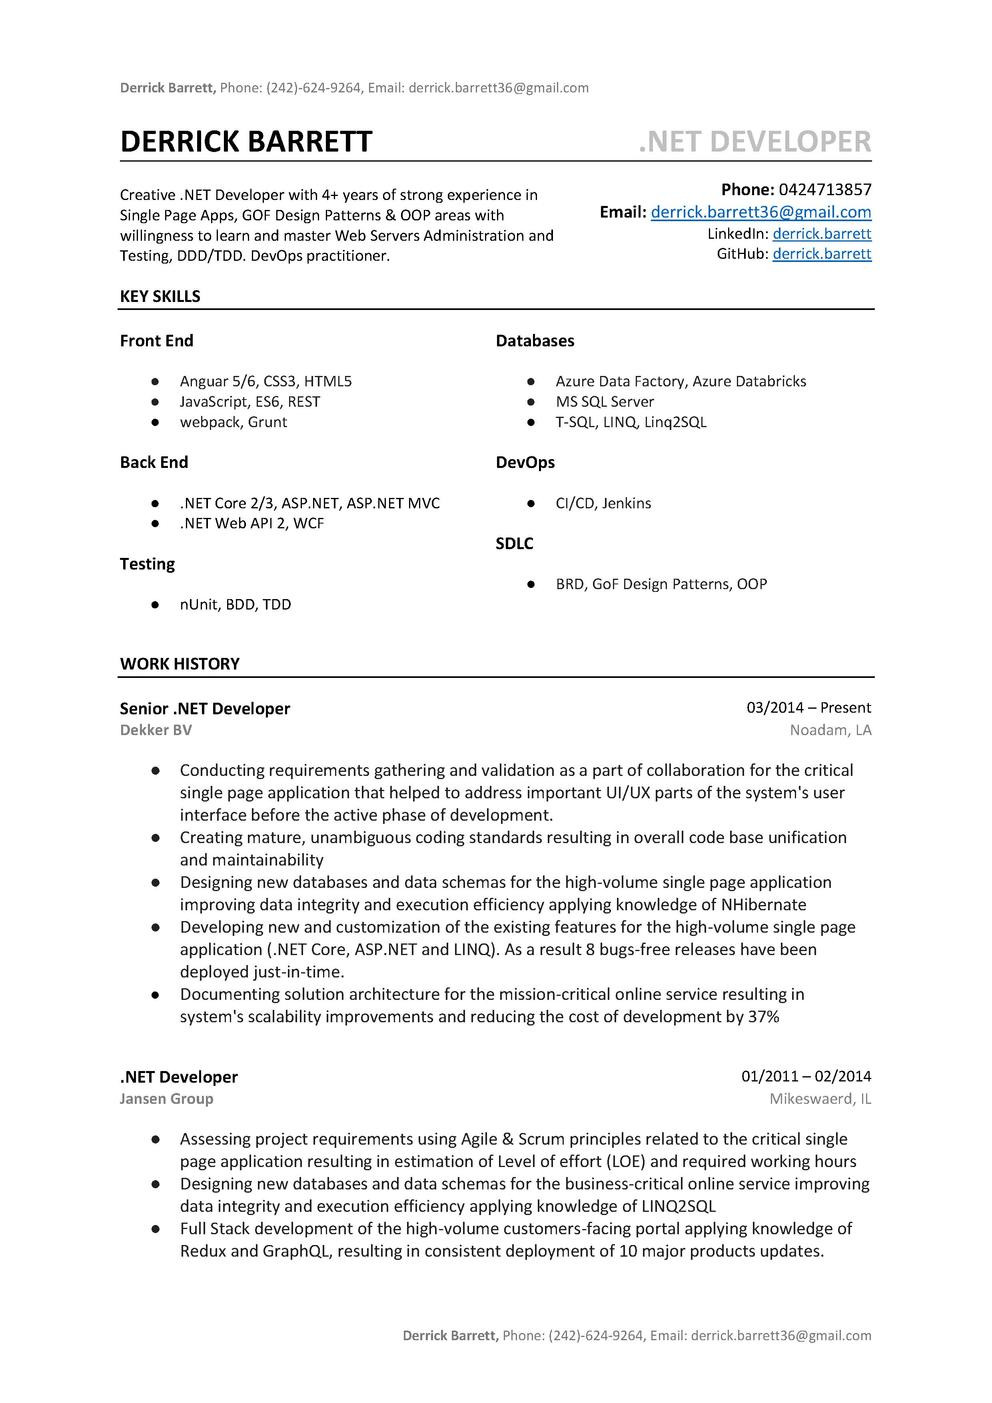 Net Experience with Sql Resume Samples 101-developer-resume-cv-templates/net-developer-resume-sample.md …